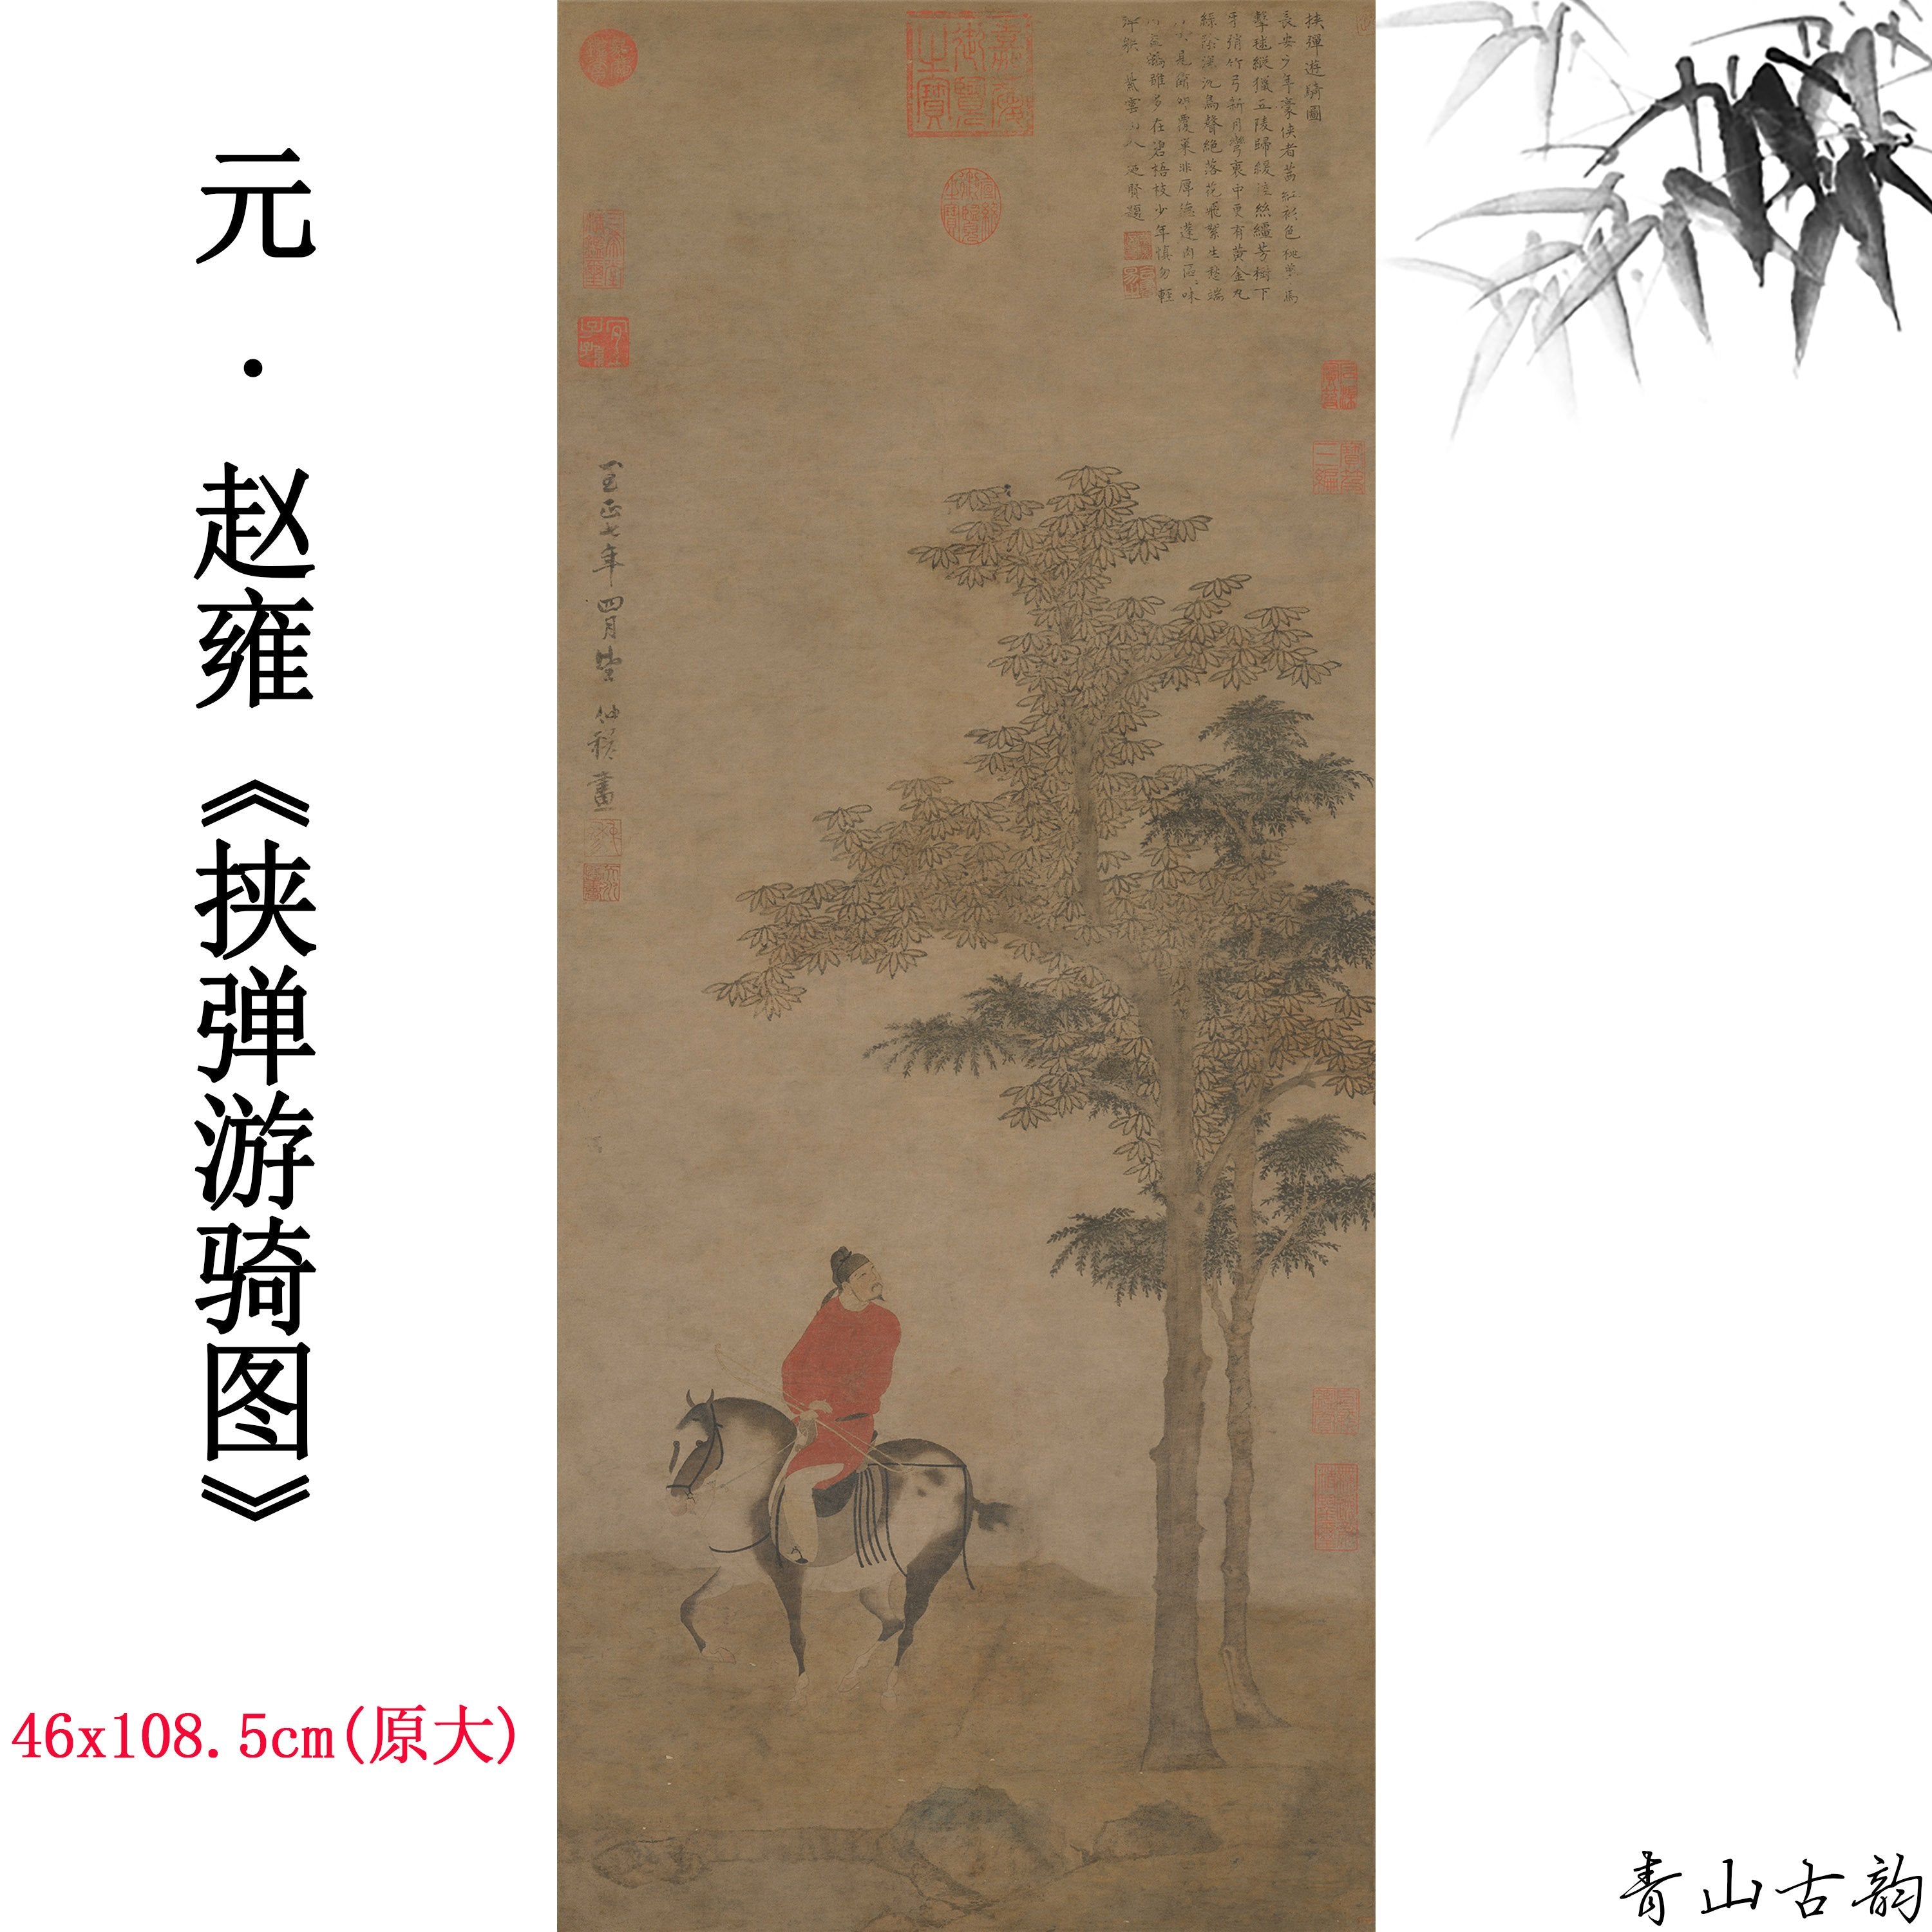 Chinese Antique Art Painting 元 赵雍 挟弹游骑图 Yuan Zhao Yong Xie Dan You Qi Tu China Ancient Wall Picture Ideas 1692-Chinese Style Finds™